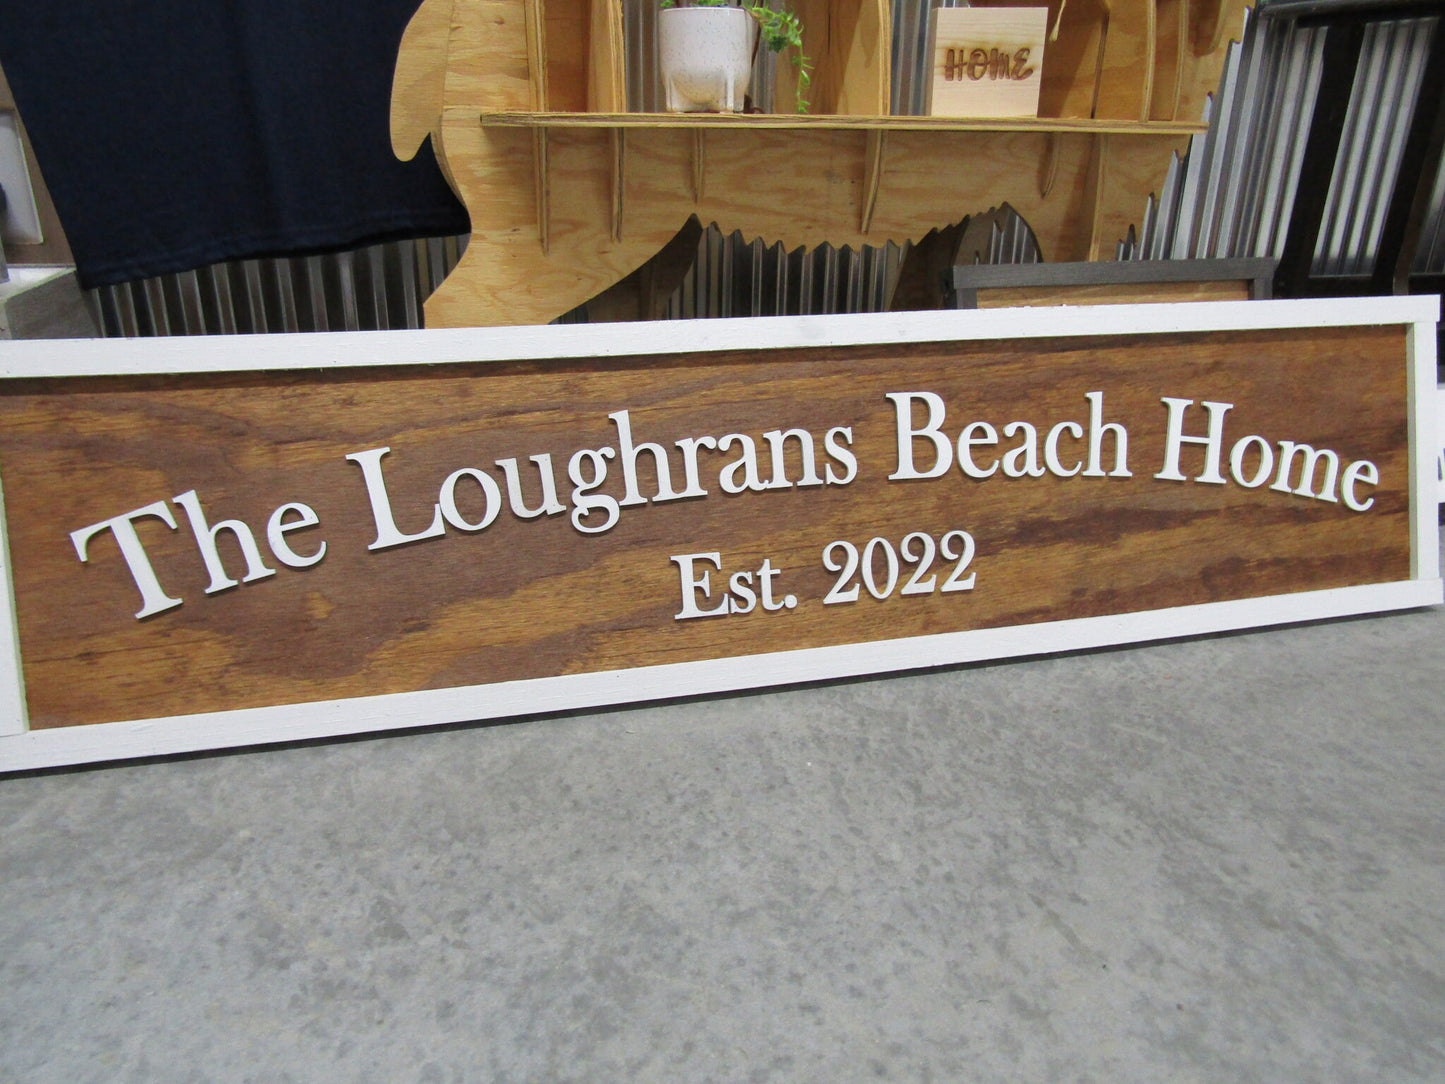 Beach Home New House Gift Vacation Spot Personalized Custom Name Established Date Wooden Handmade Sign Decor BNB Cabin Raised Letters Family